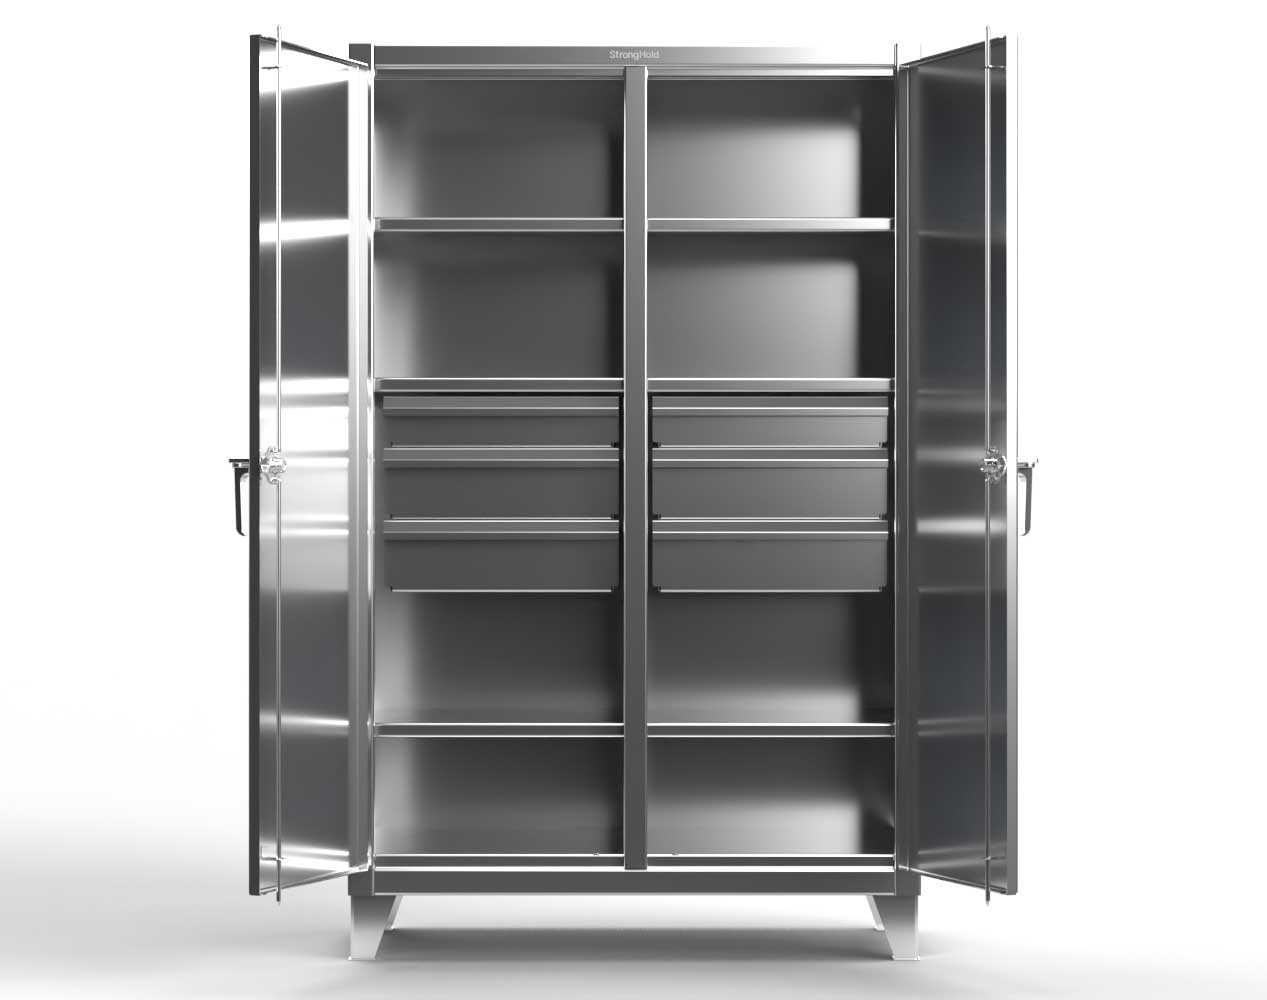 Extreme Duty 12 GA Stainless Steel Double Shift Cabinet with 8 Drawers, 6 Shelves - 60 In. W x 24 In. D x 78 In. H